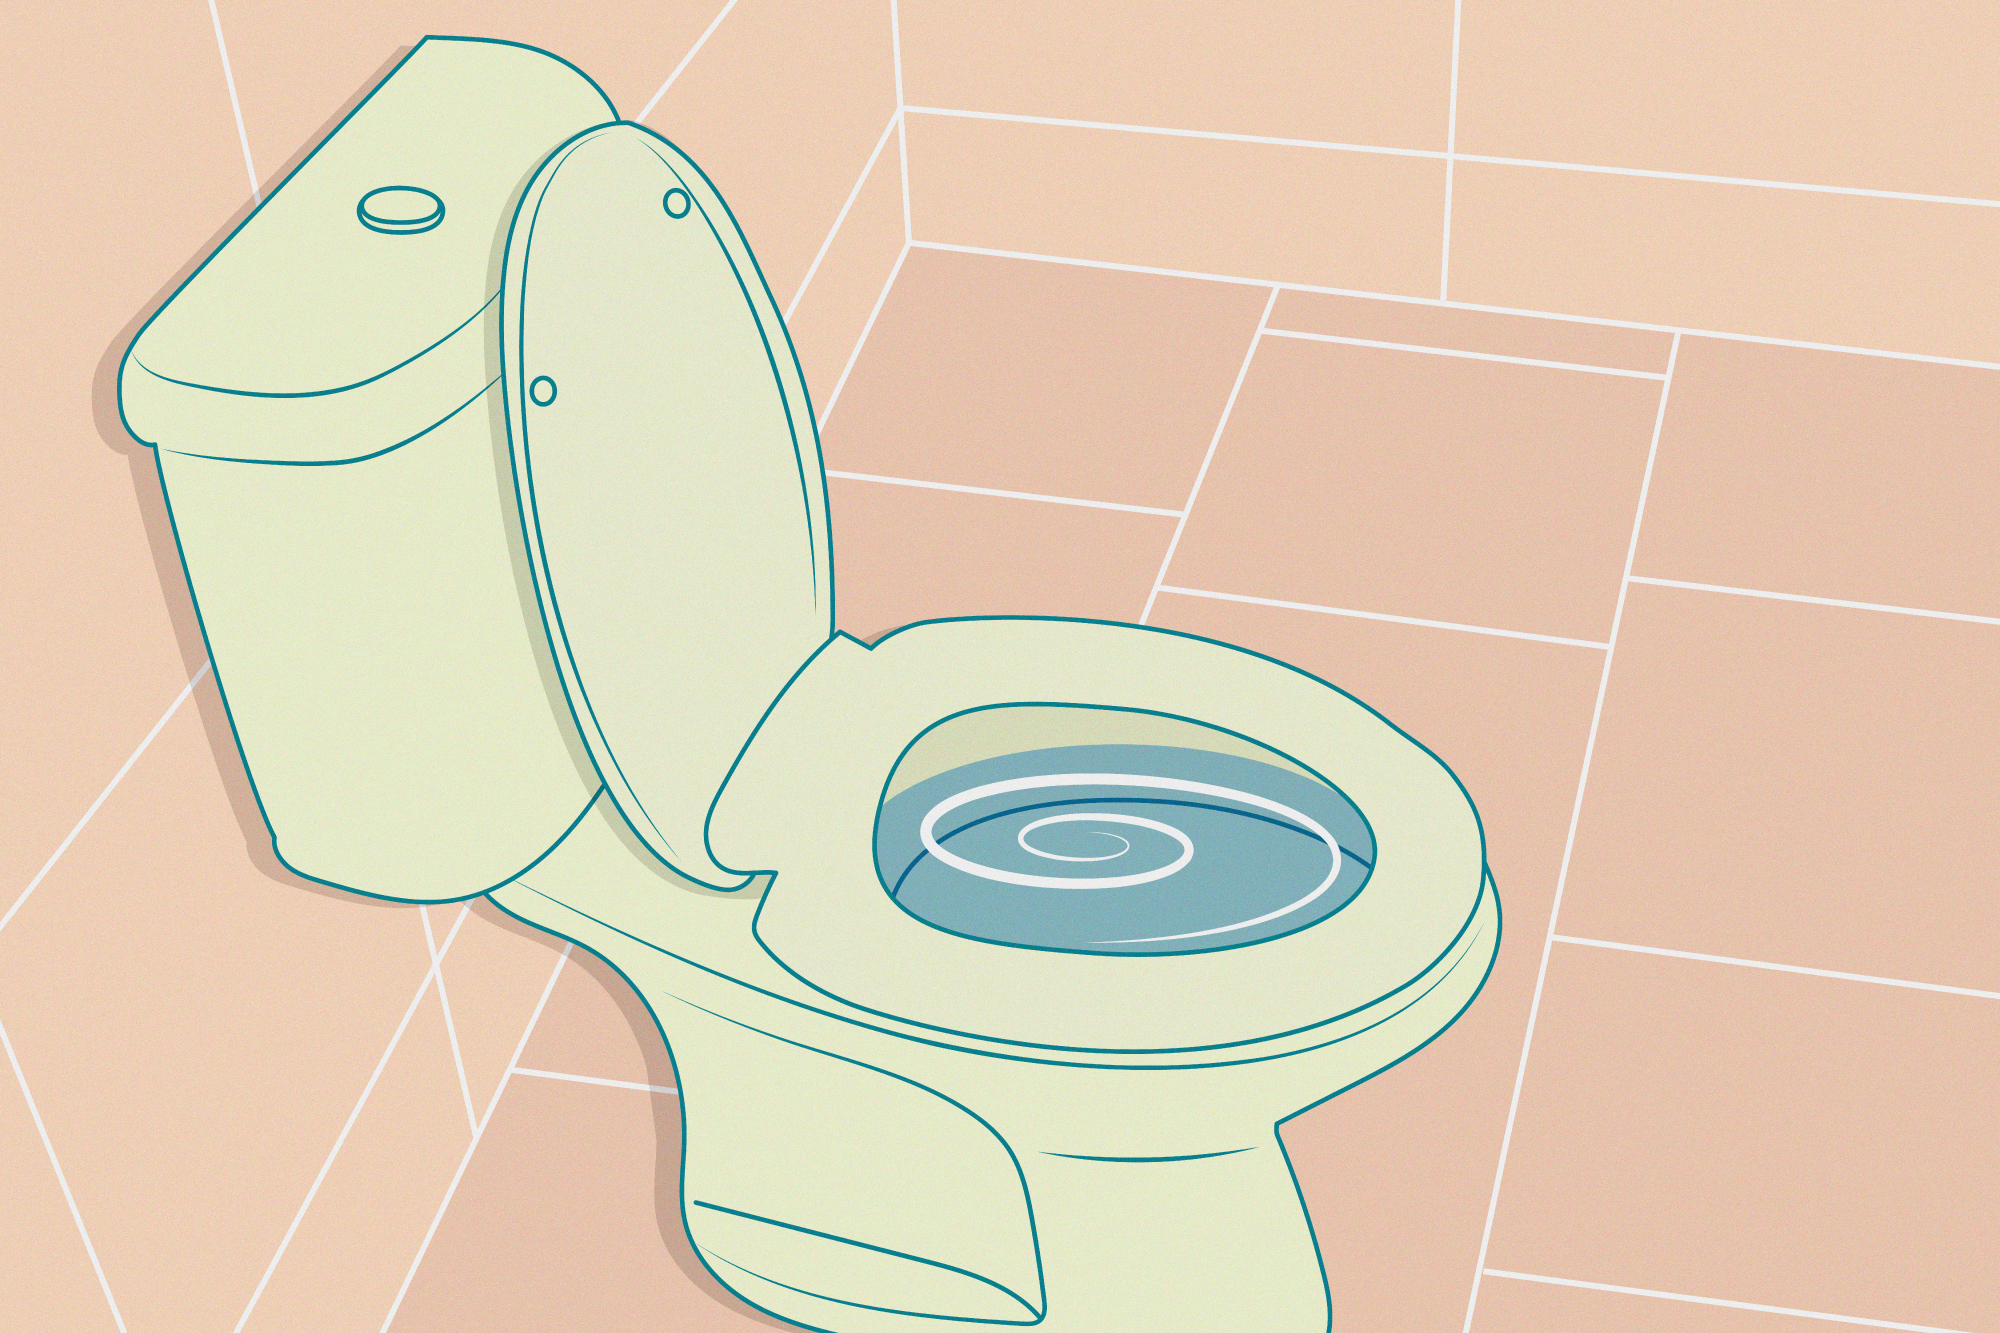 Does it matter if you flush with toilet lid up or down? Not really.